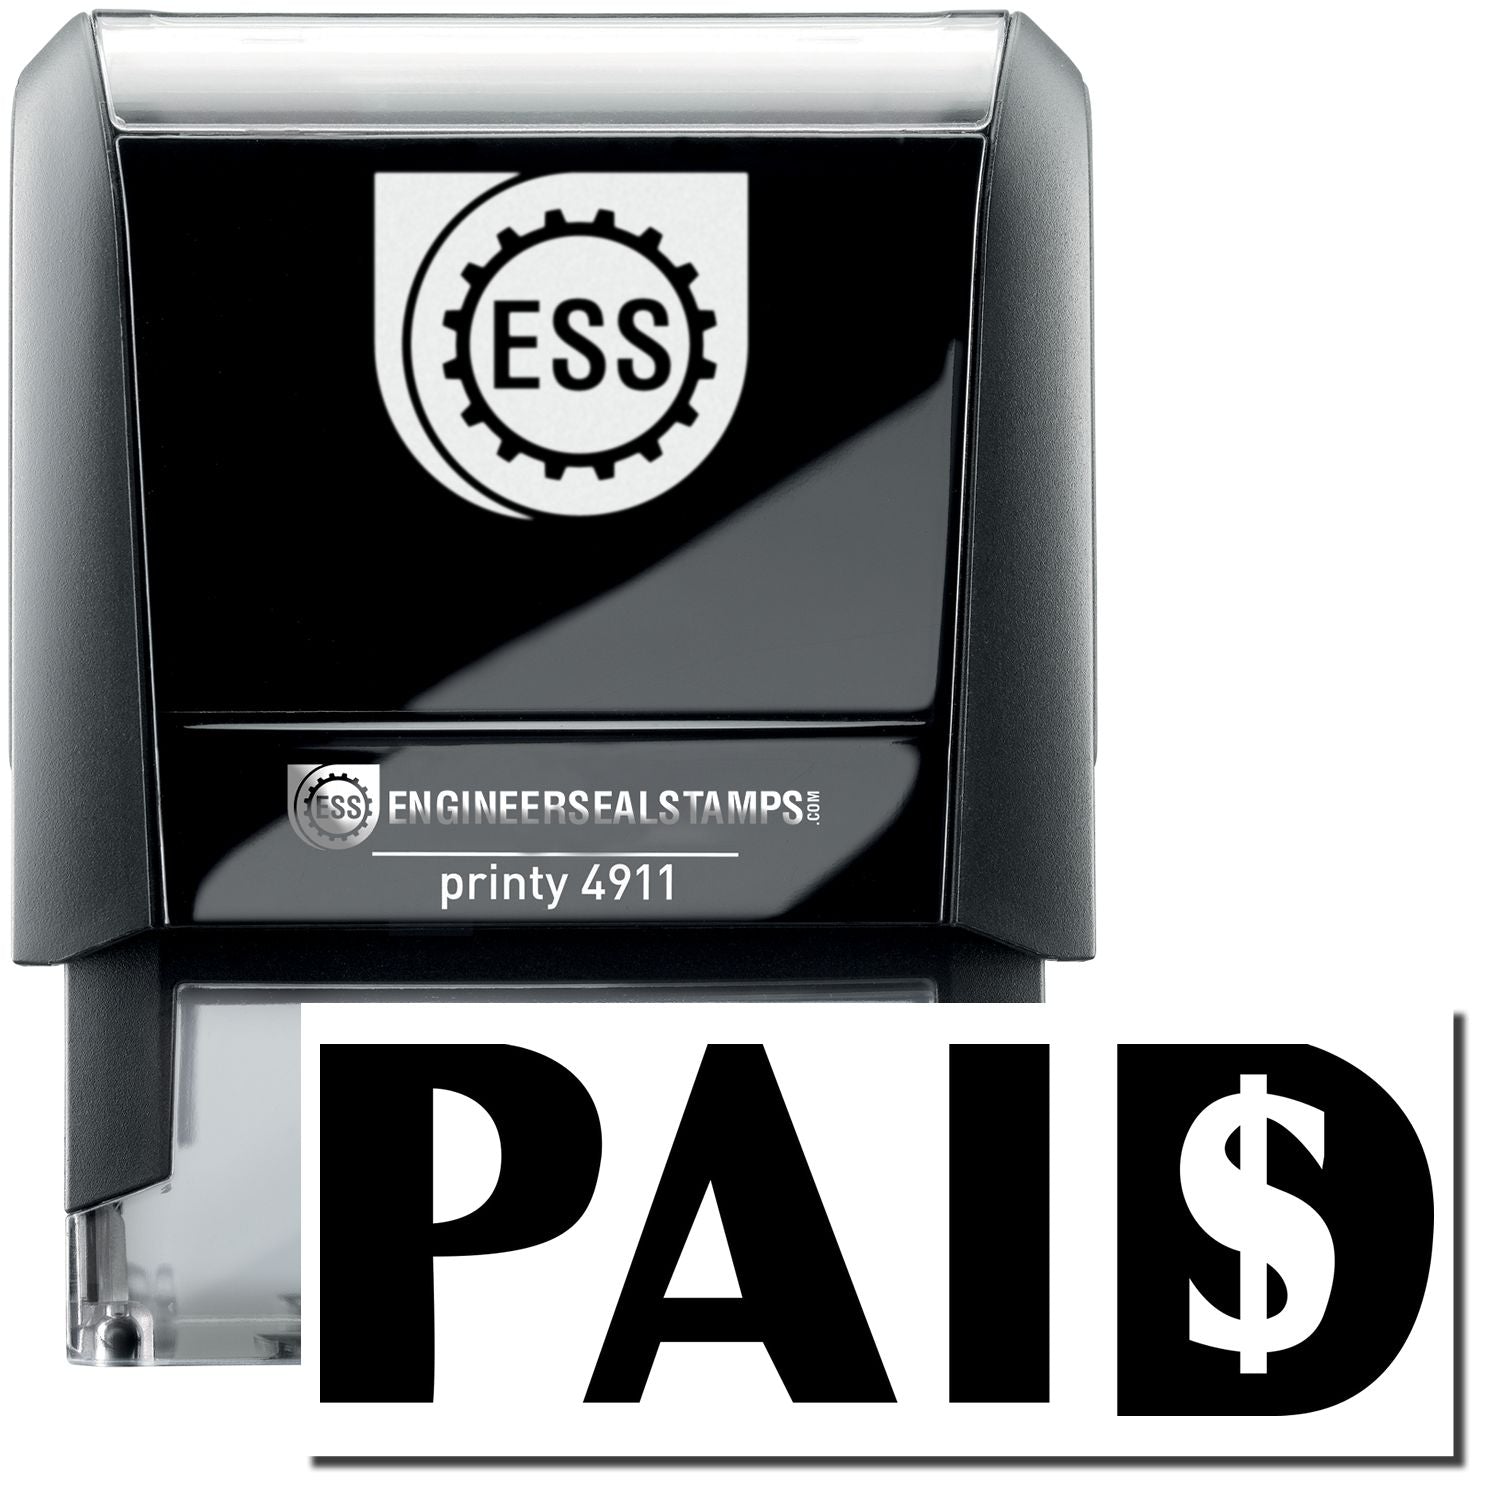 A self-inking stamp with a stamped image showing how the text "PAID" in bold font with a dollar sign inside the letter "D" is displayed after stamping.